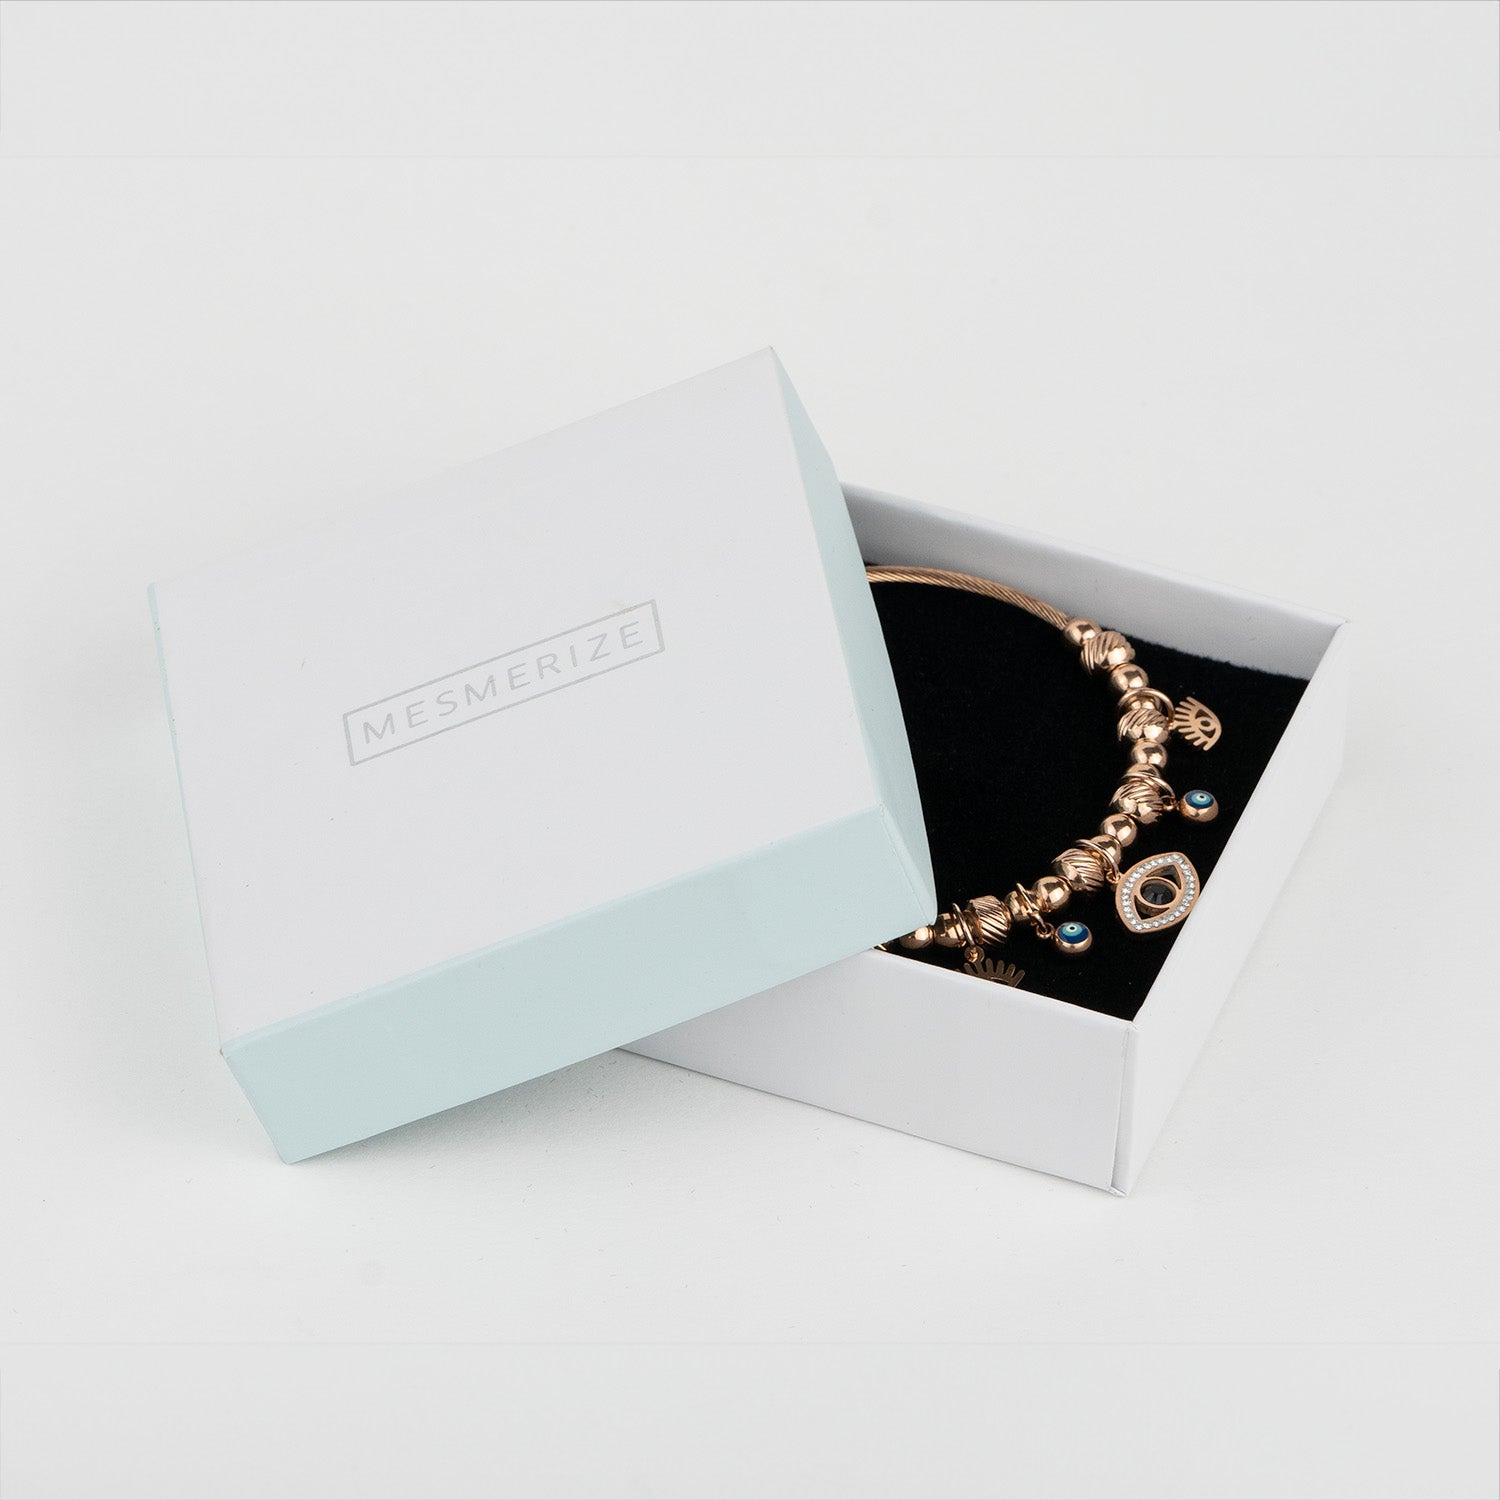 FRENELLE Jewellery | Rose-Gold Charm Bracelet | FREE charms